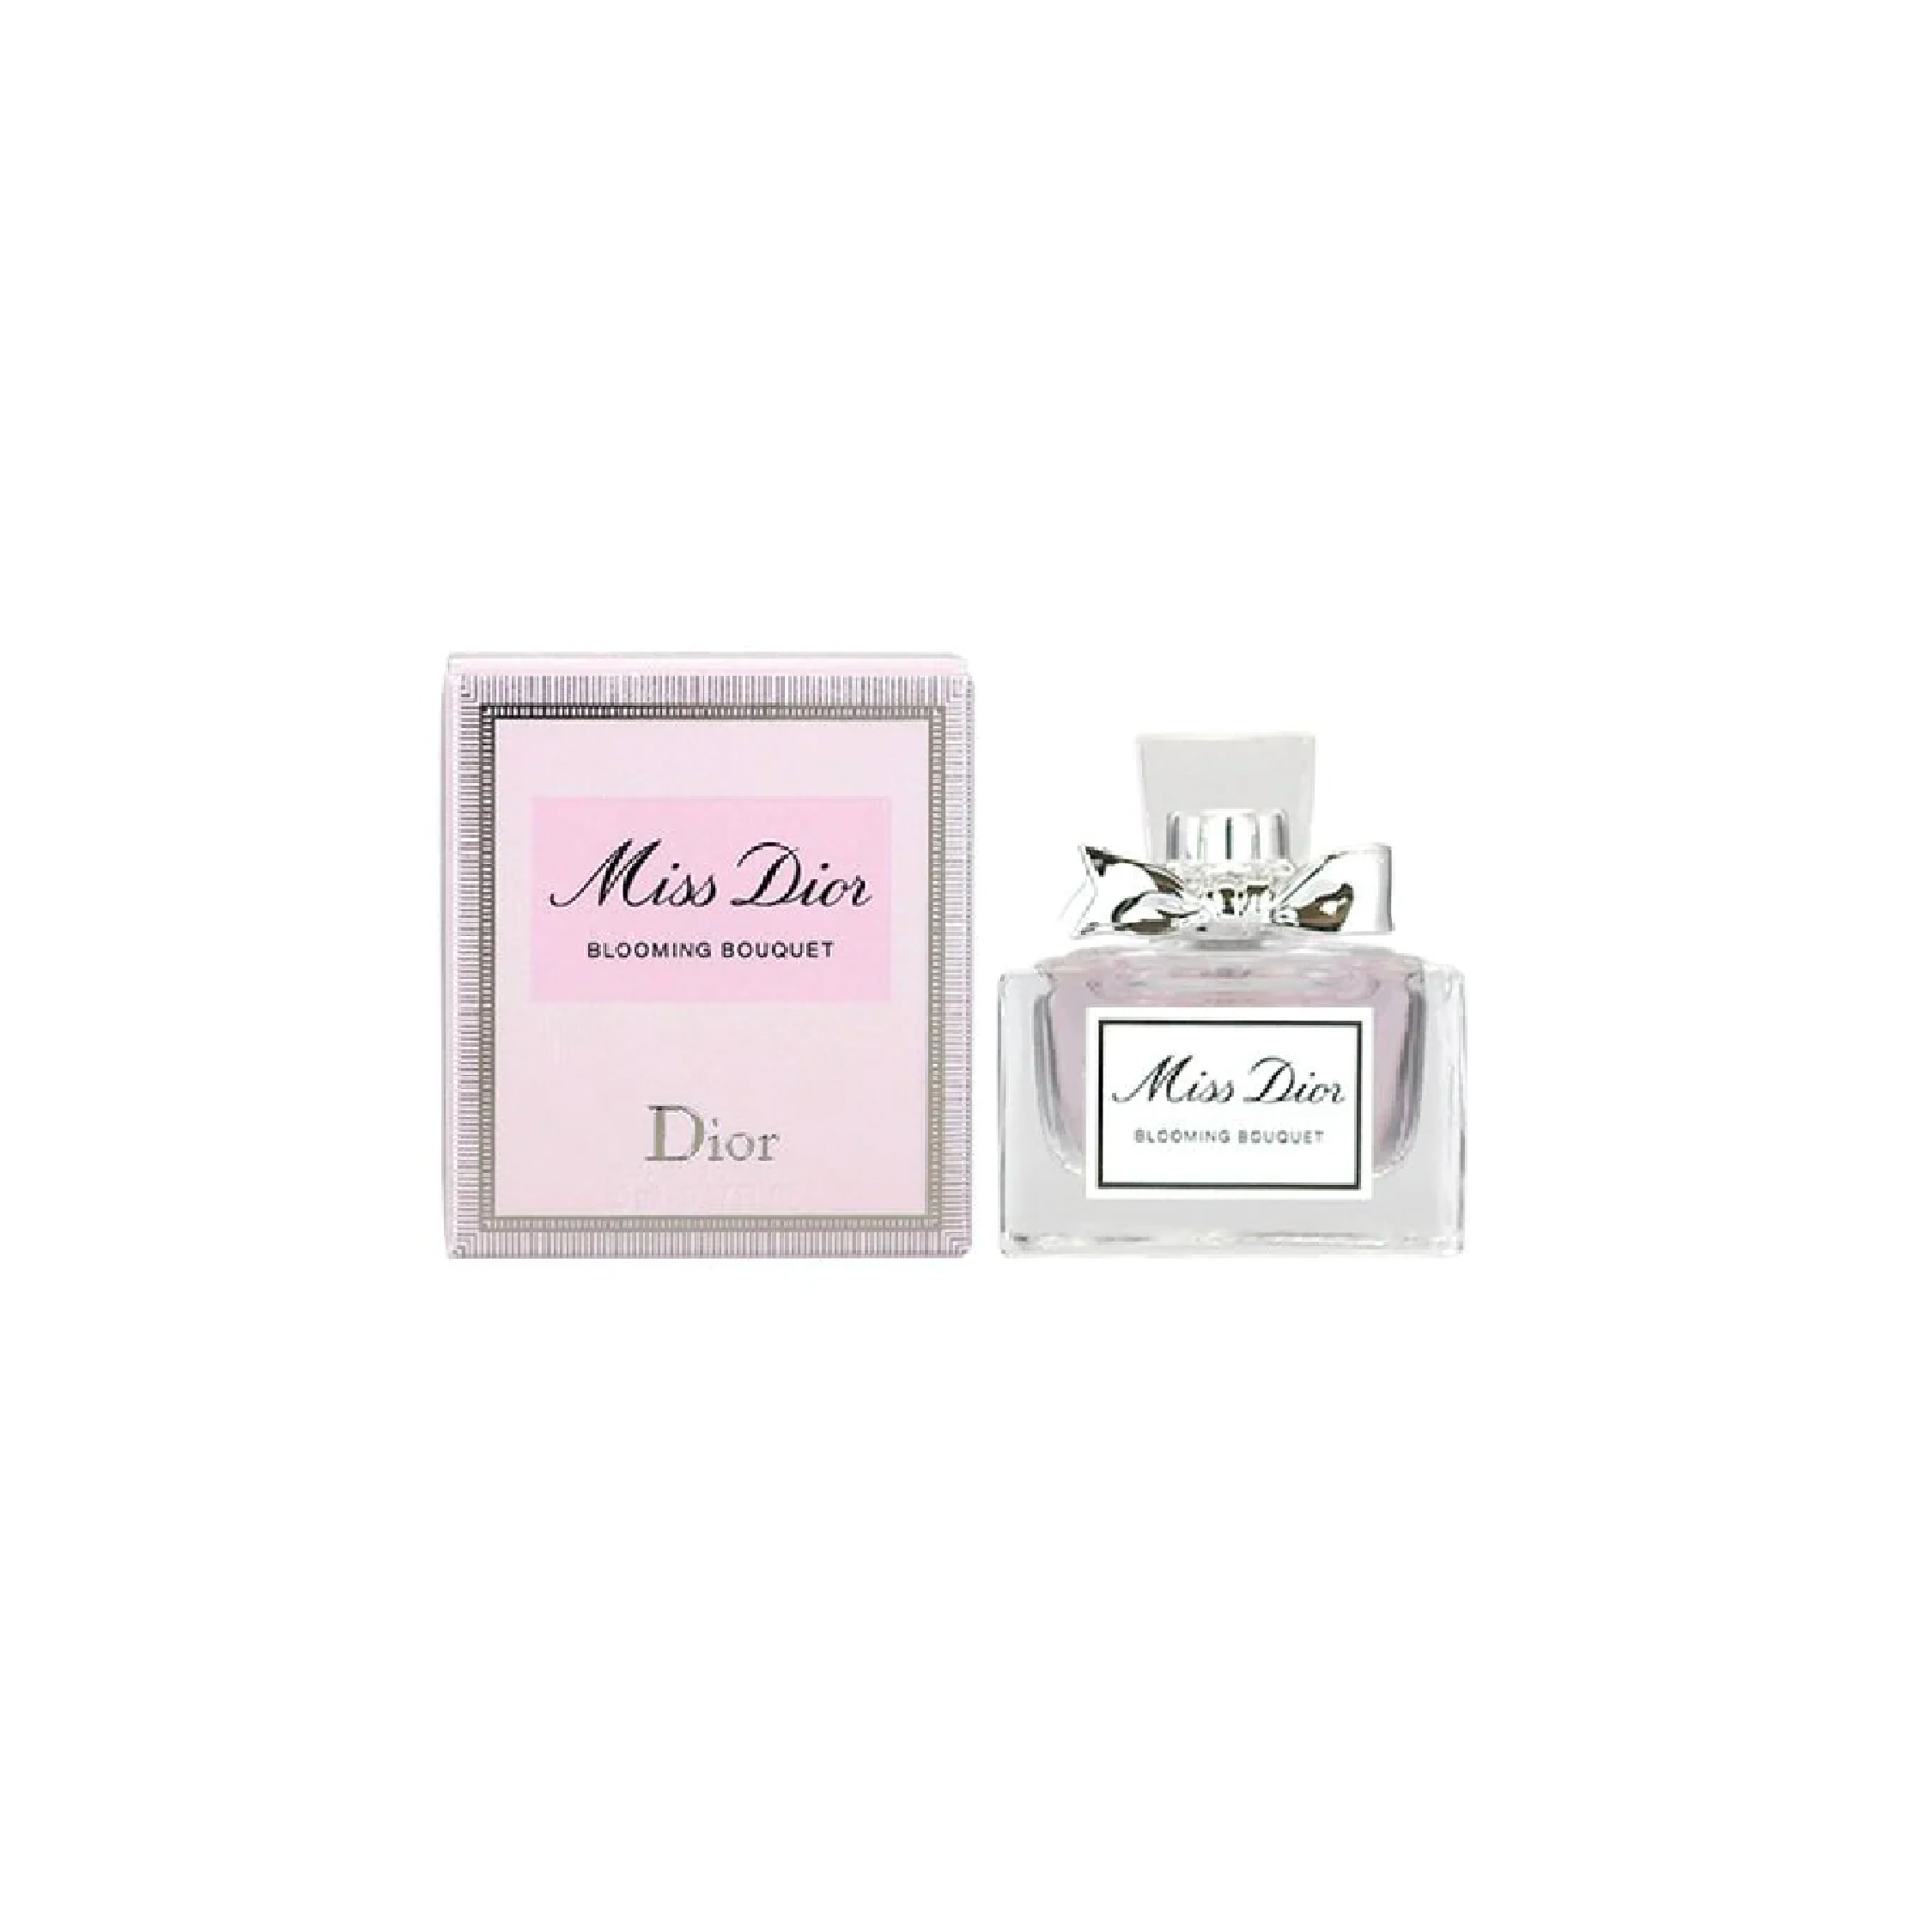 DIOR MISS BLOOMING BOUQUET EDT 5ML